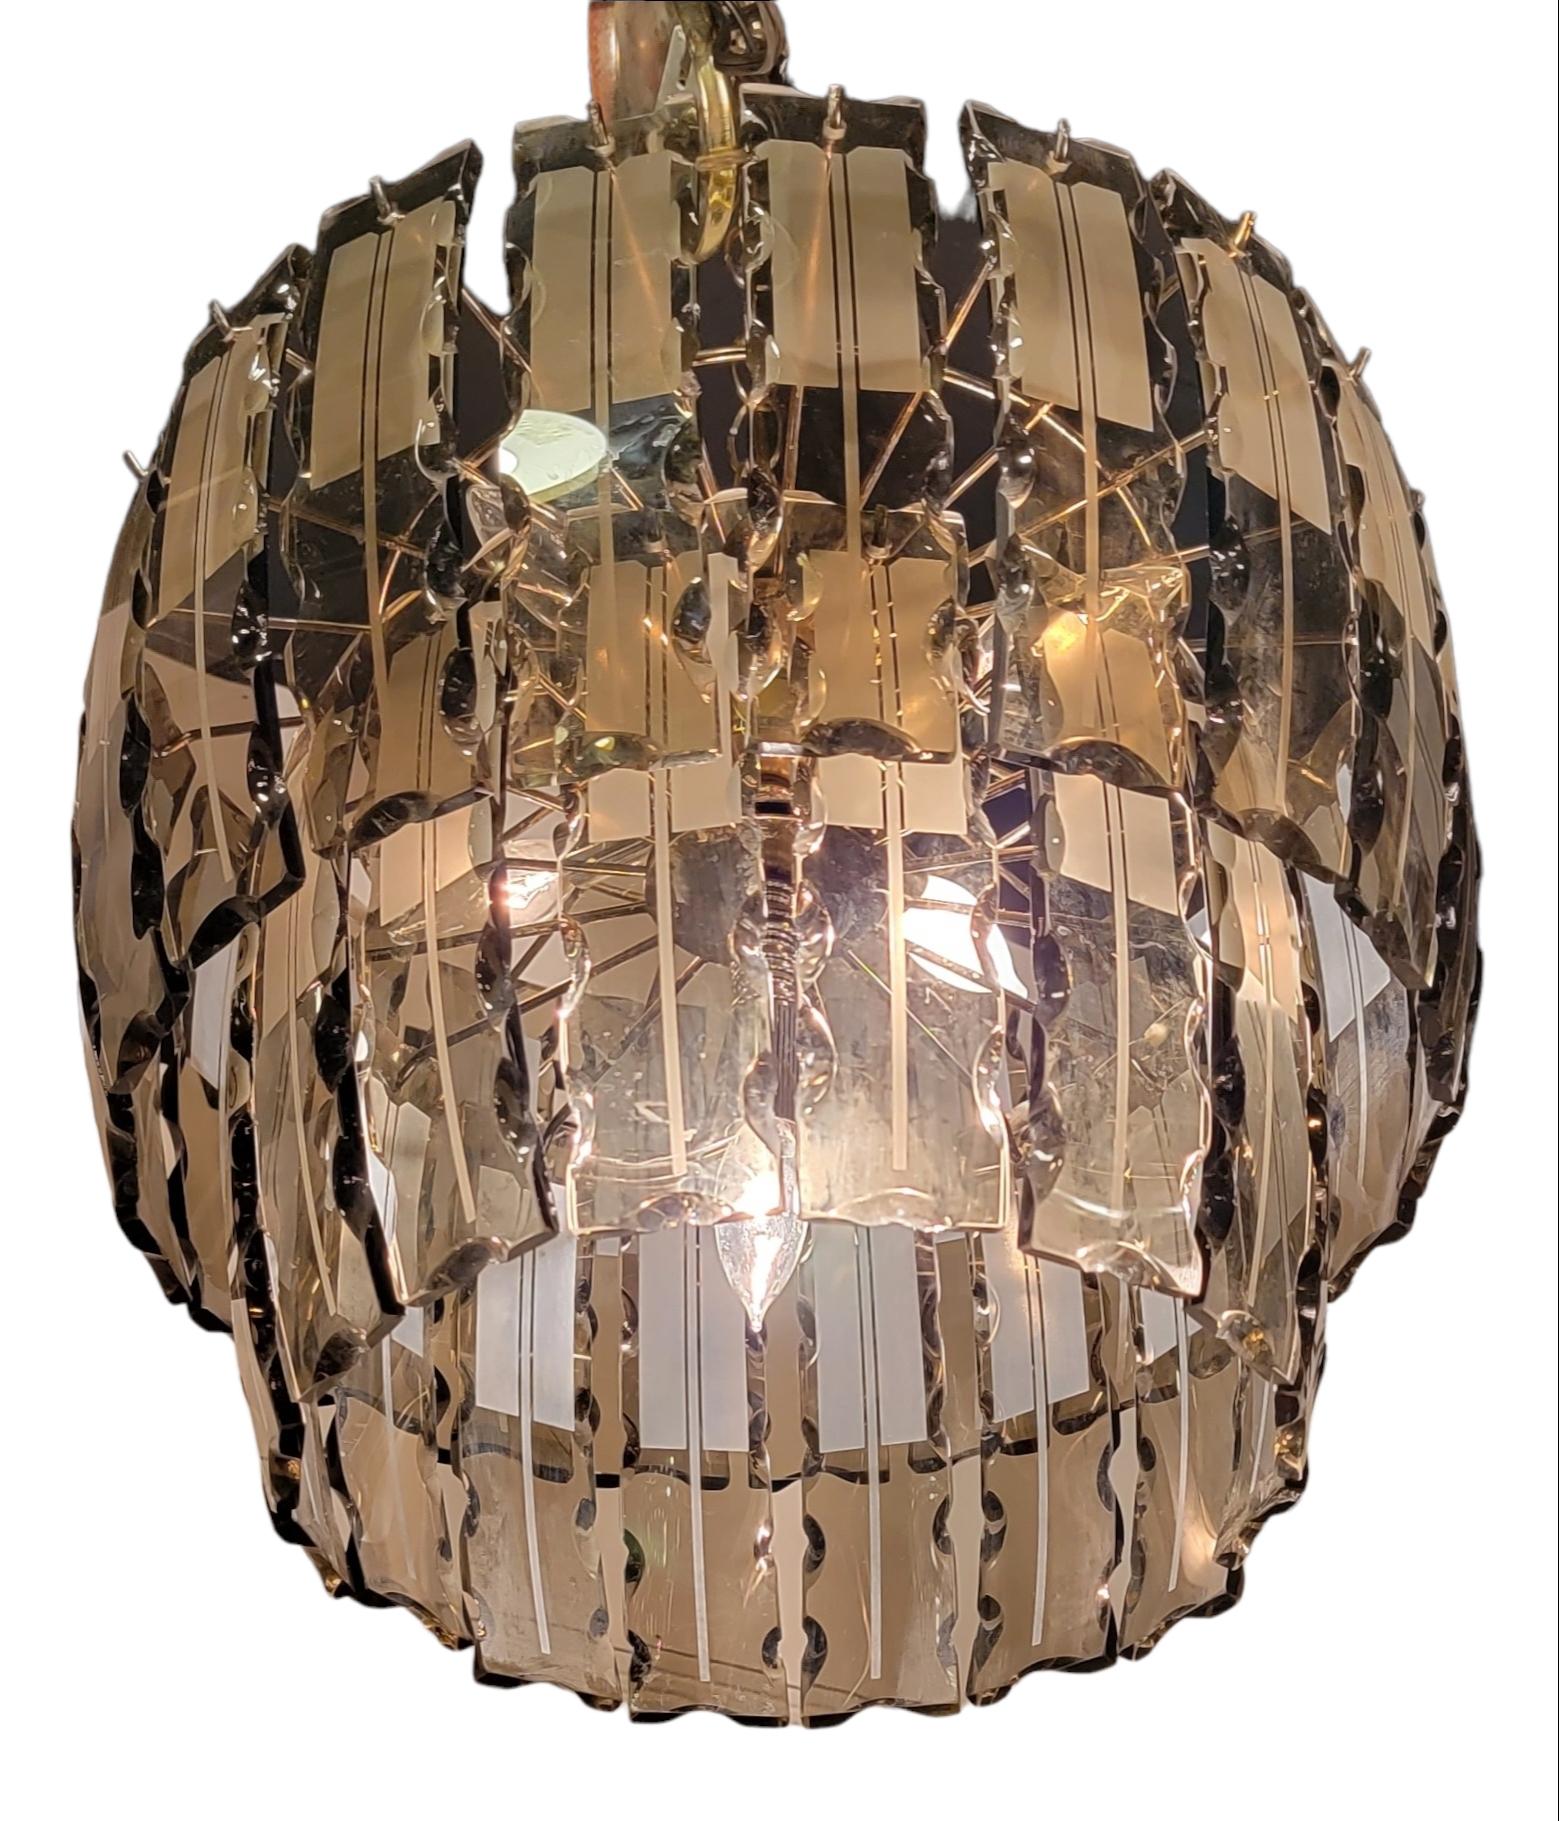 Fontana Arte Two Tier Smoked Etched Glass Chandelier. Measures approx 14 high x 18 diameter
